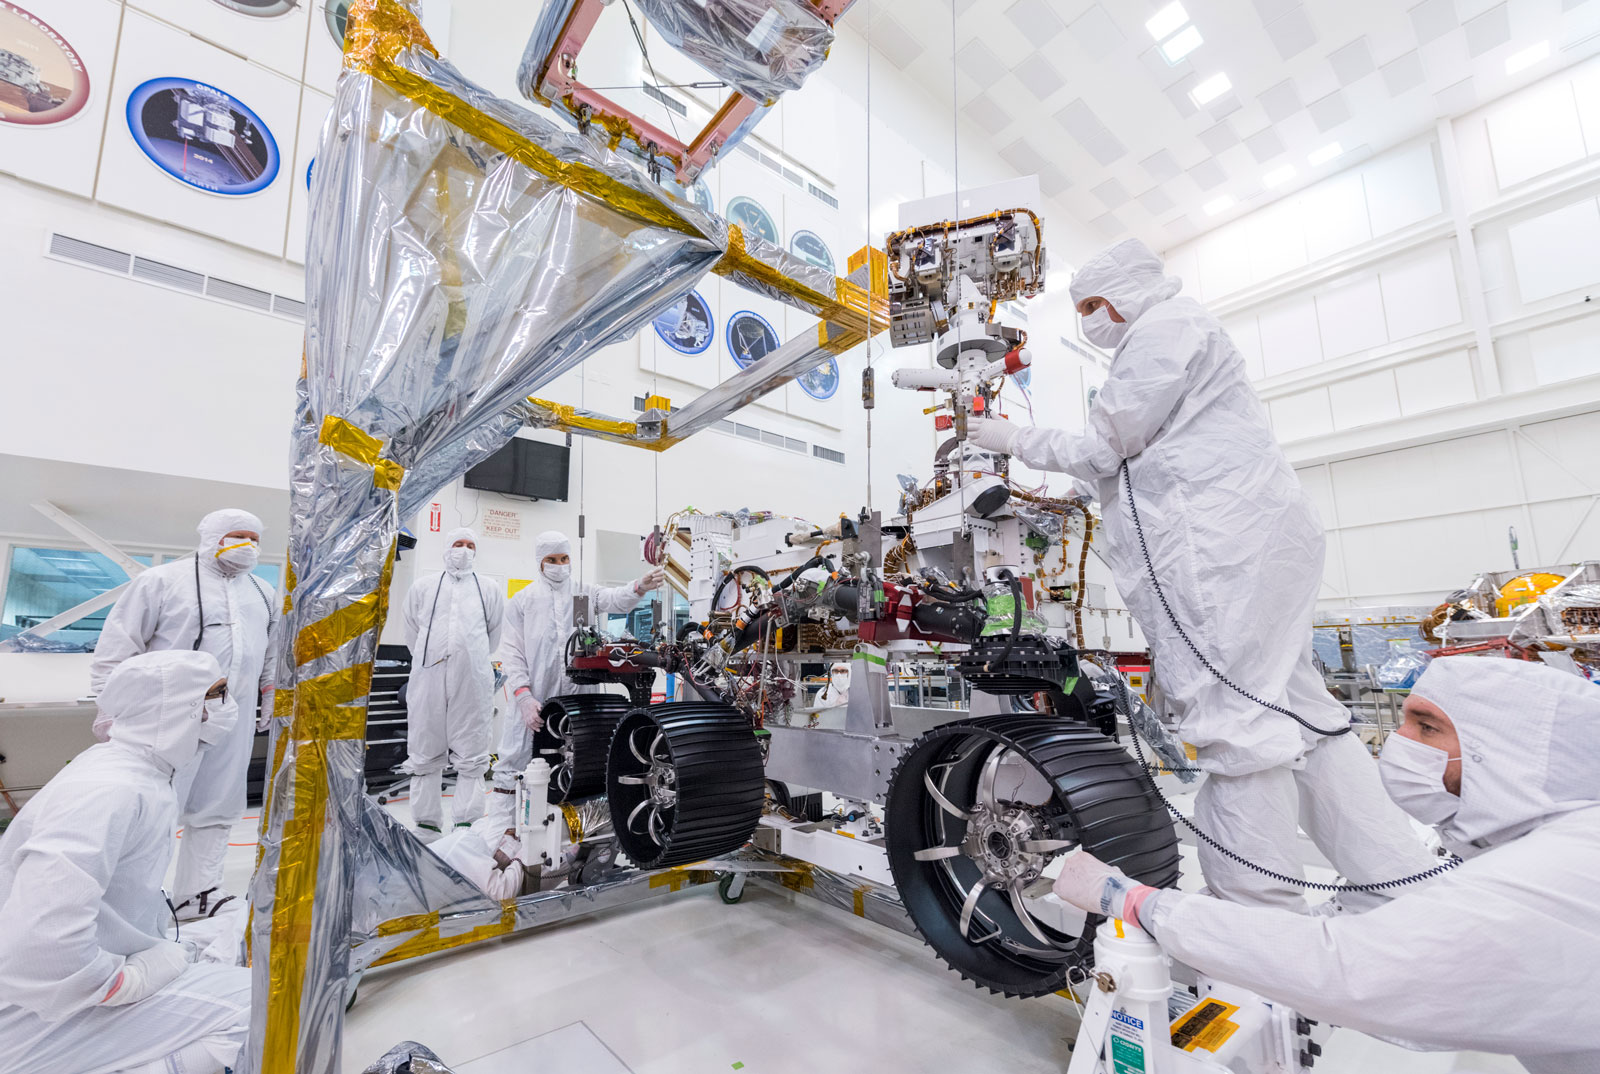 In this image, taken on June 13, 2019, engineers at JPL install the starboard legs and wheels — otherwise known as the mobility suspension — on the Mars 2020 rover.